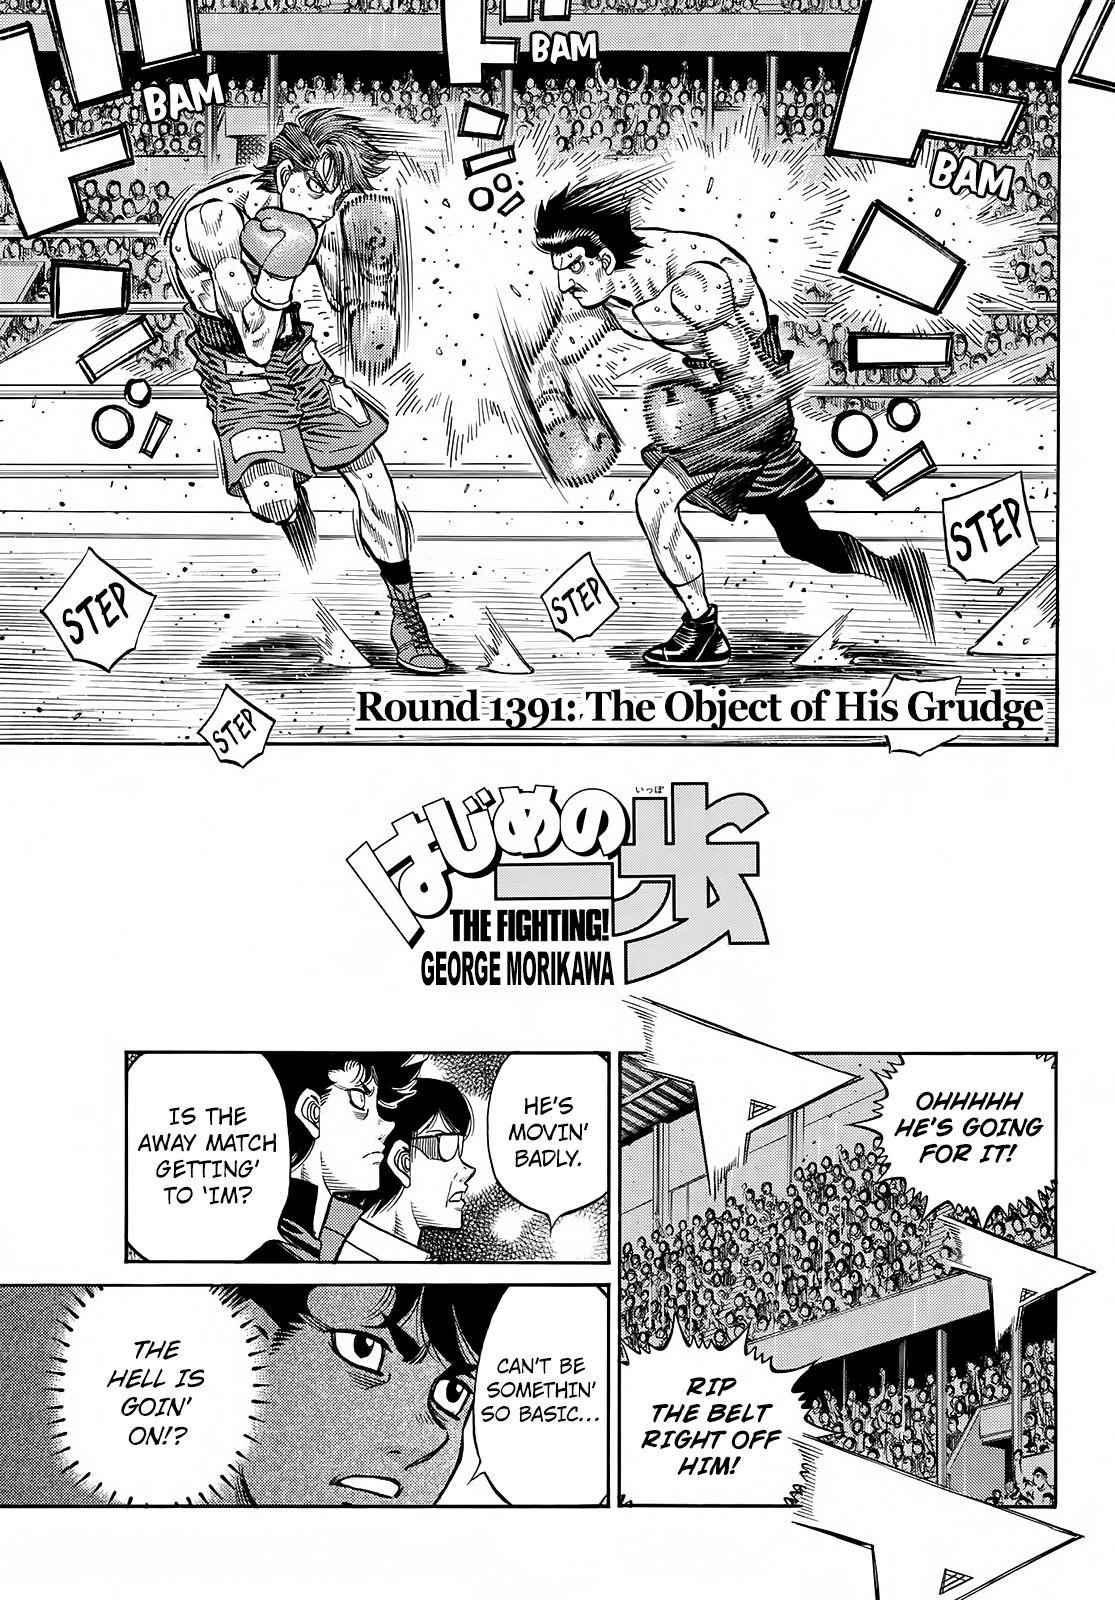 Hajime No Ippo Chapter 1433 Spoilers, Release Date, Raw Scans, And More -  News